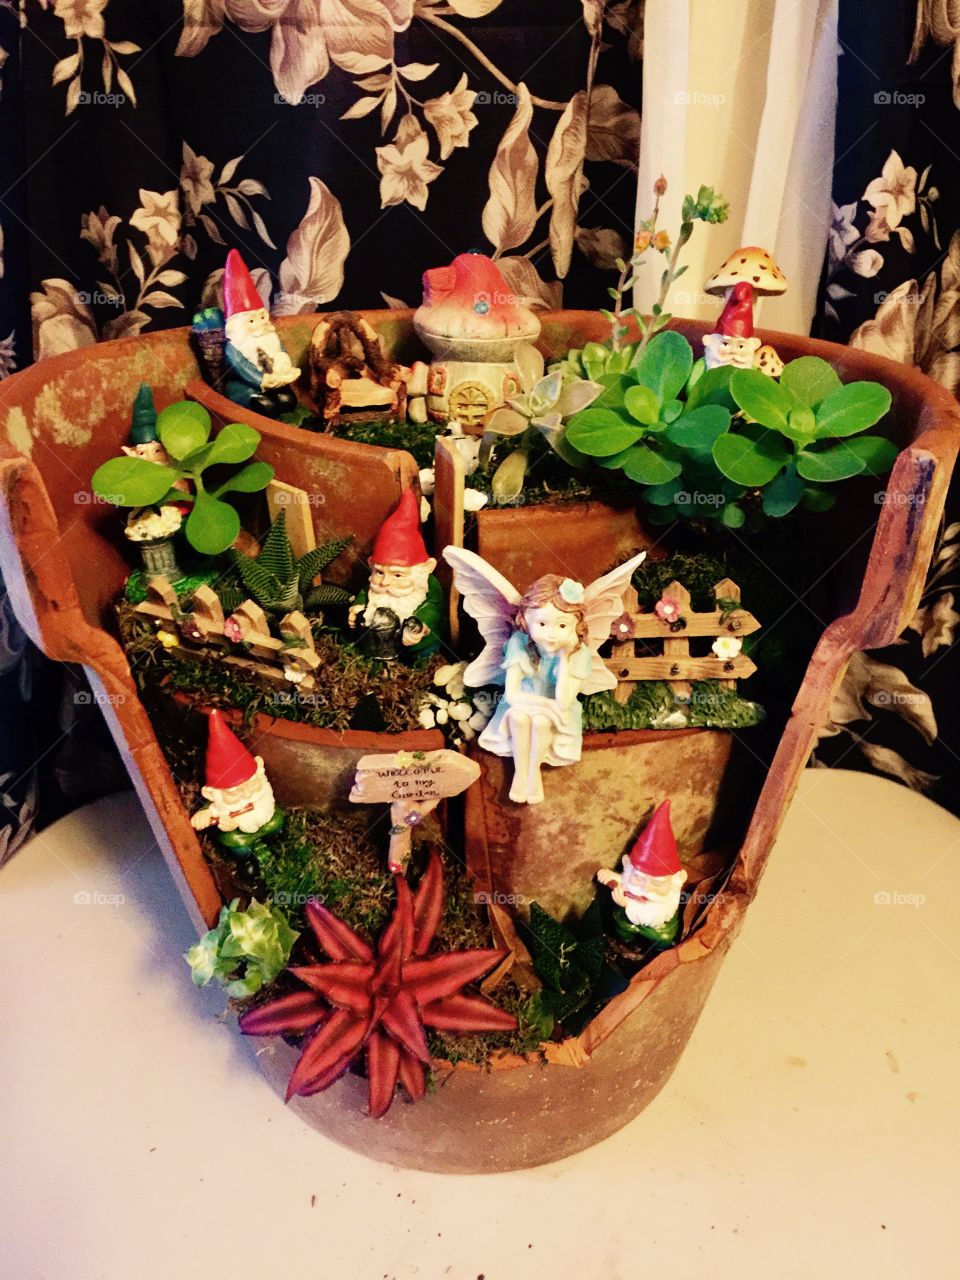 Creative plant life and fairy tale nic nacs mixed together in a broken clay pot